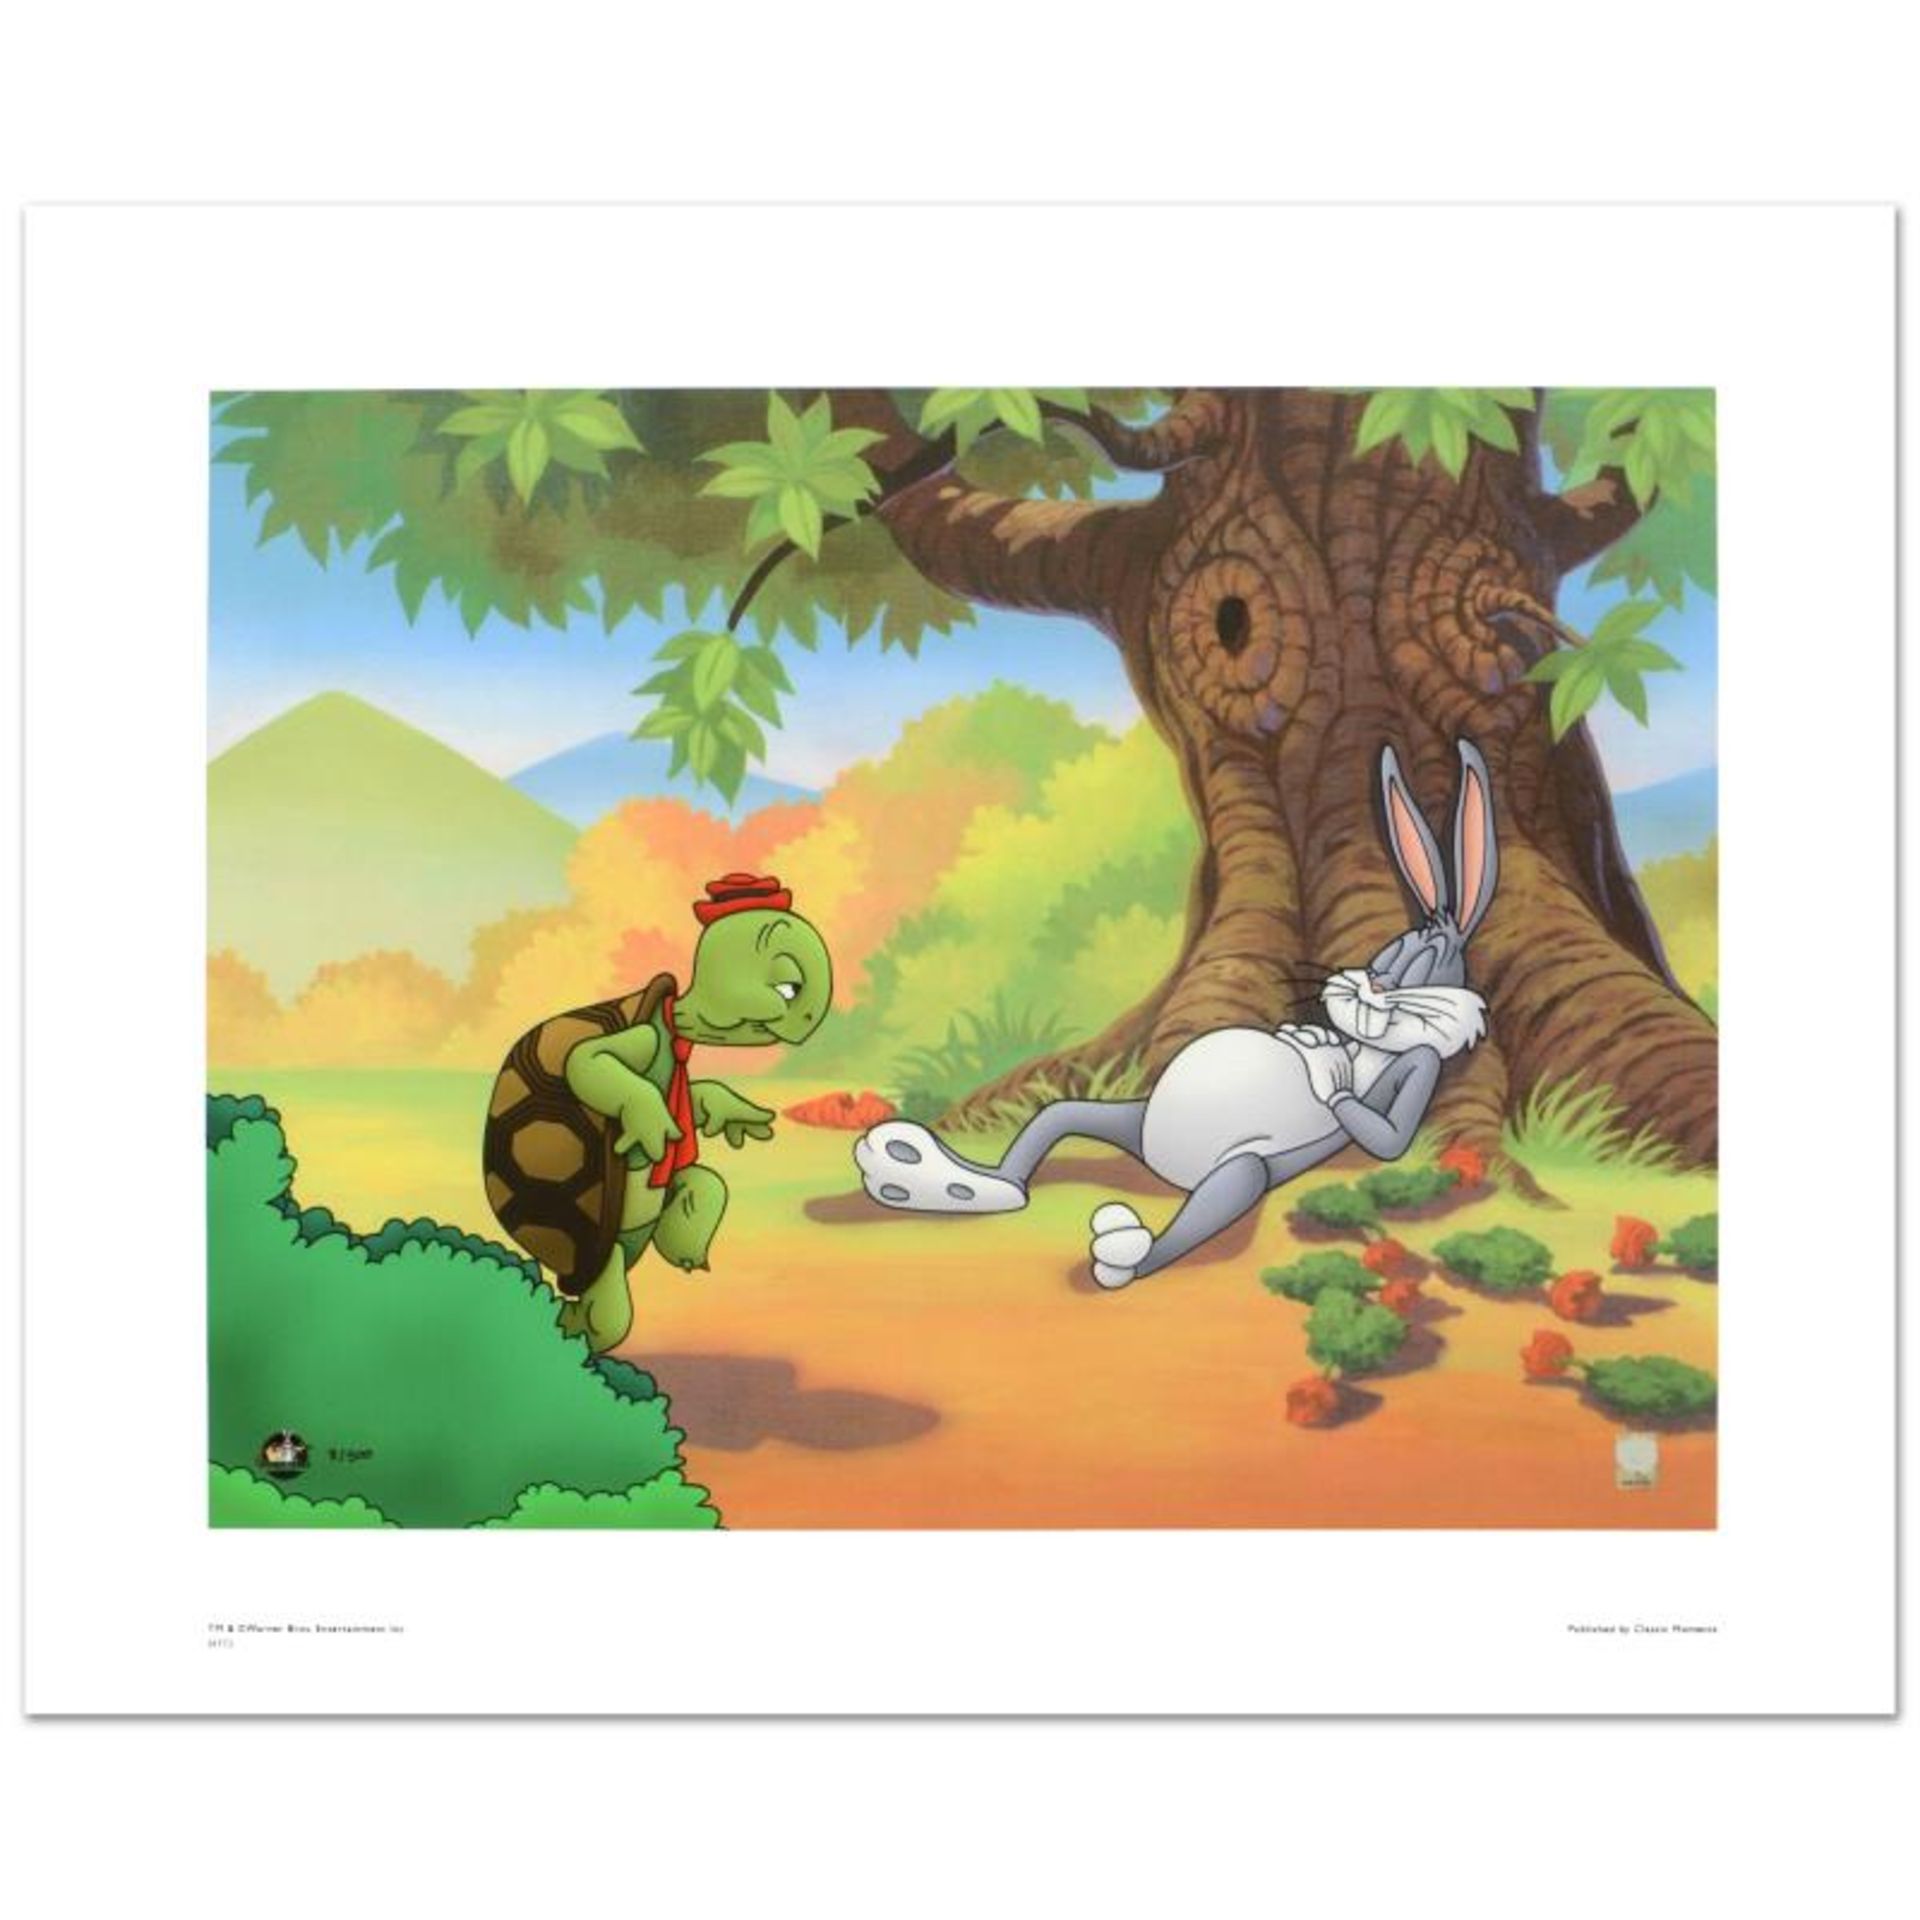 "Snooze, You Lose" Limited Edition Giclee from Warner Bros., Numbered with Holog